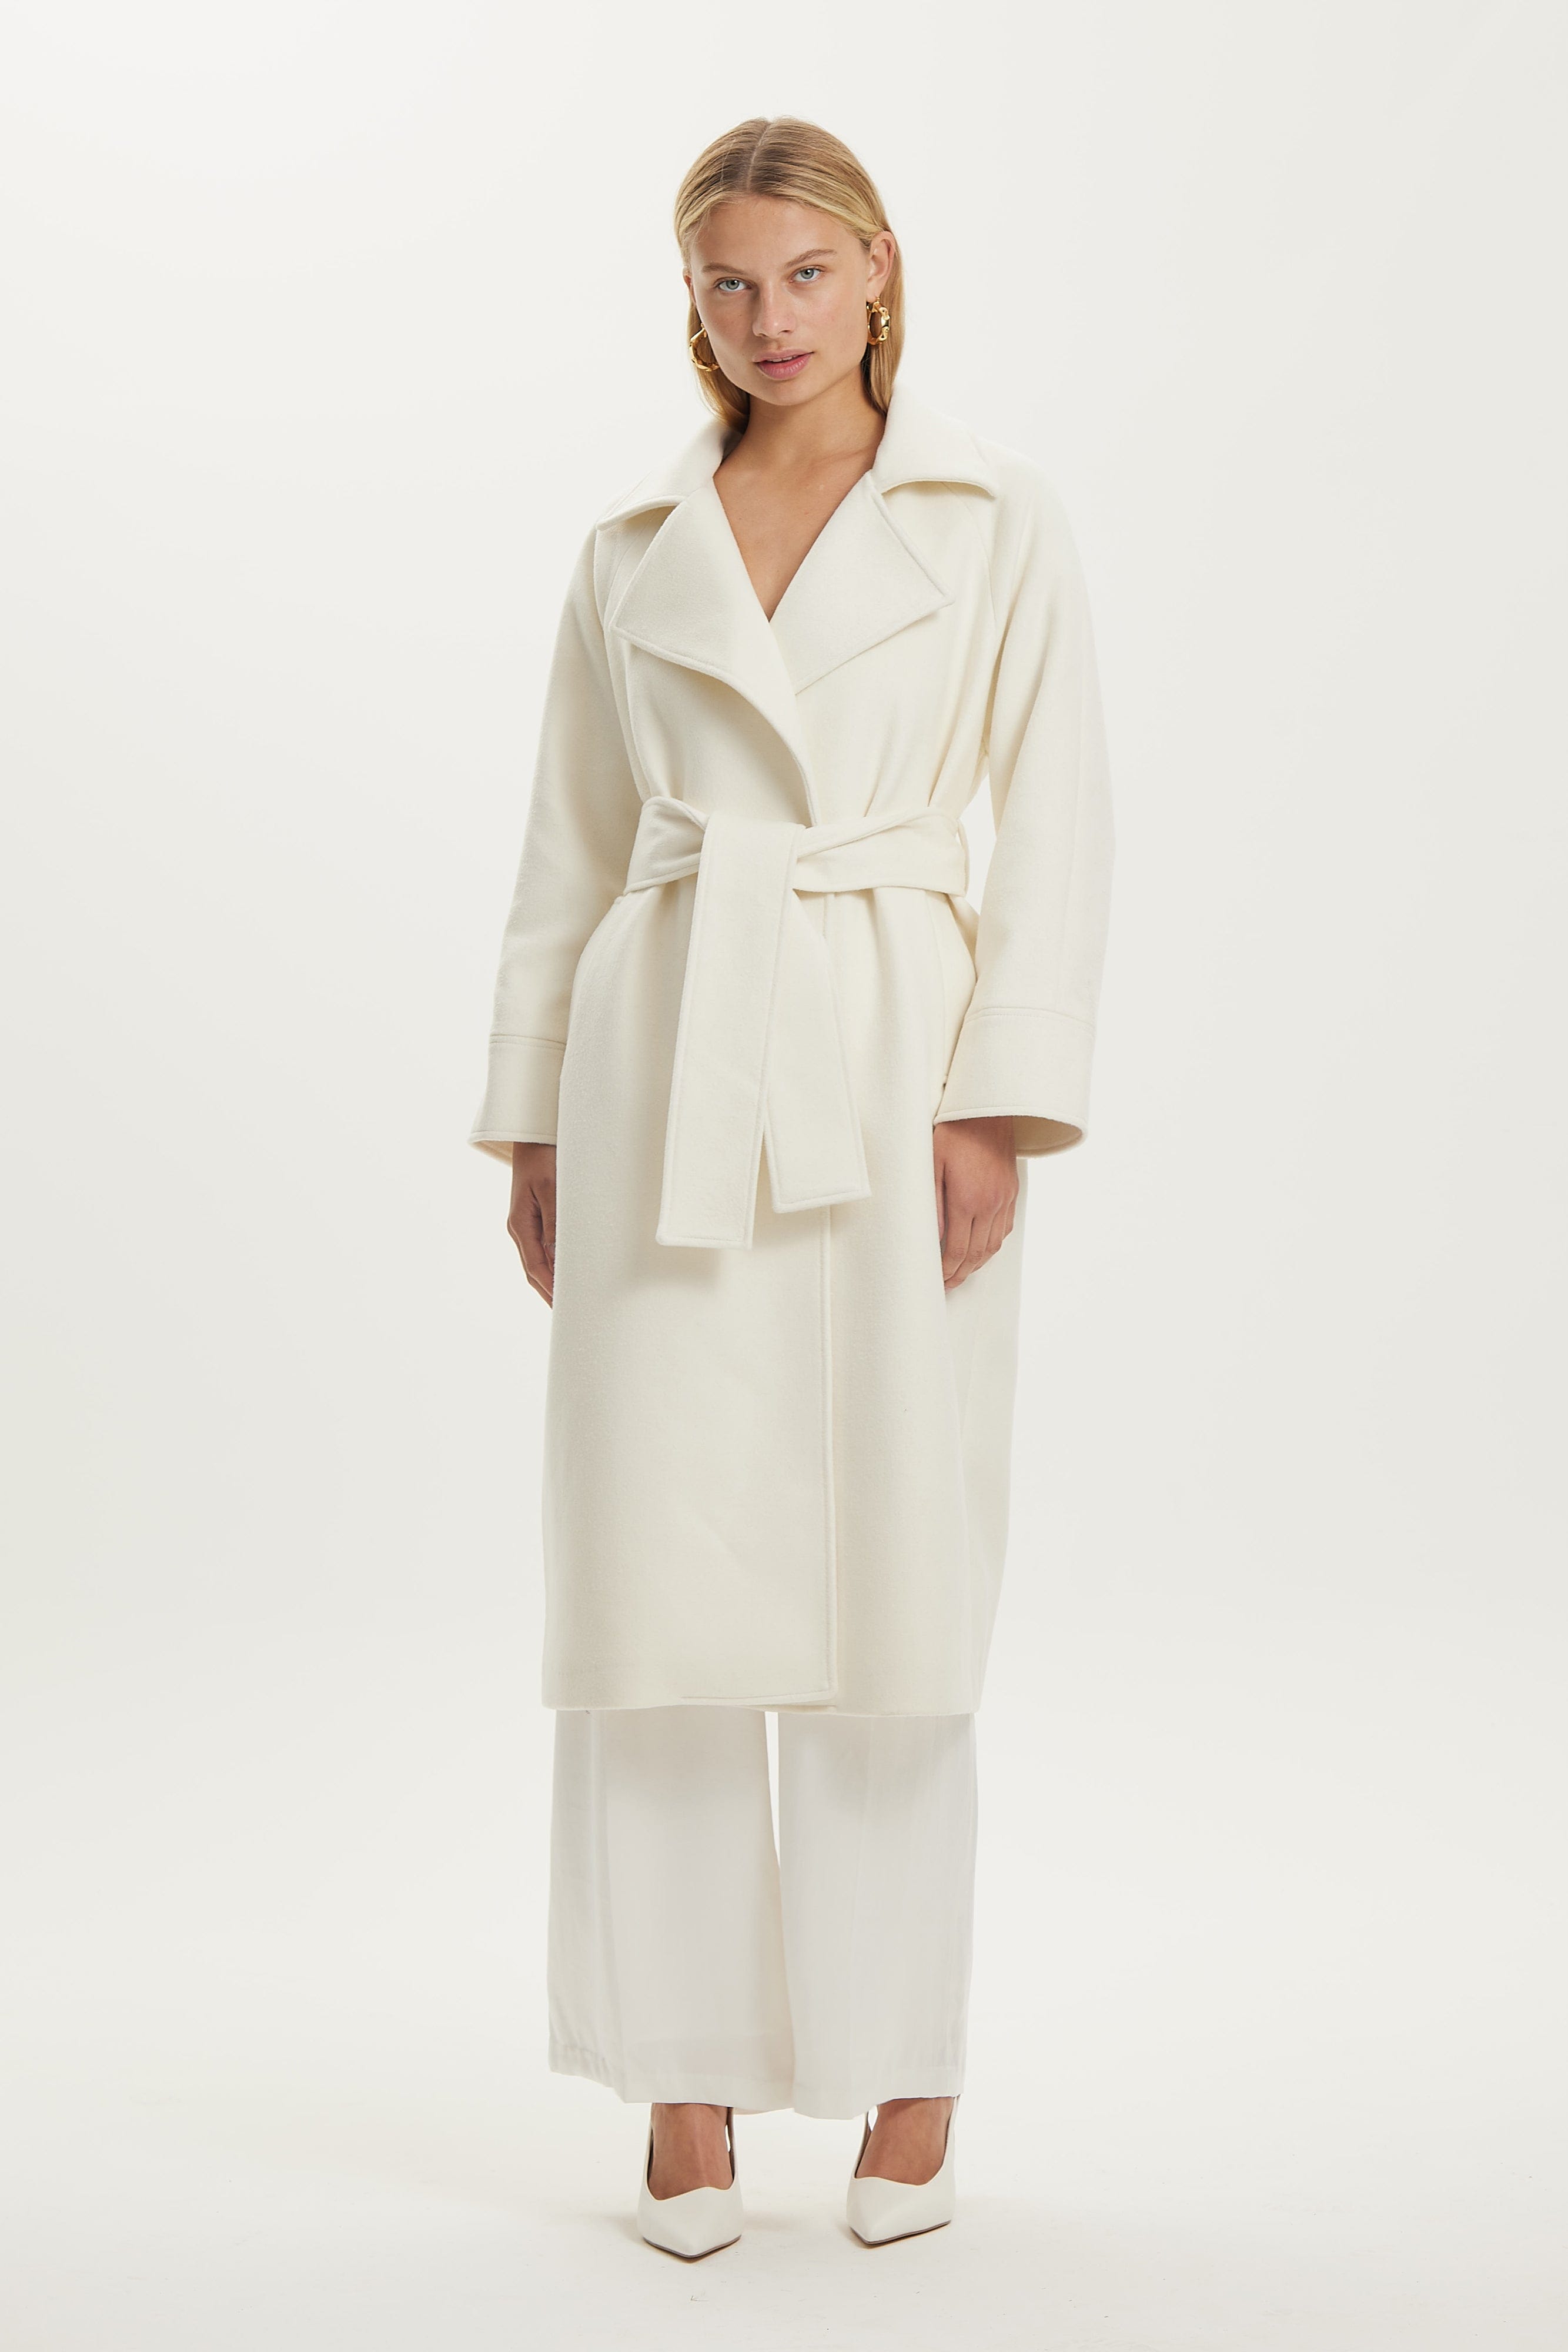 UNCOVER WOOLEN TRENCH COAT, CREAM, THIRD FORM, Women's Fashion on Sale